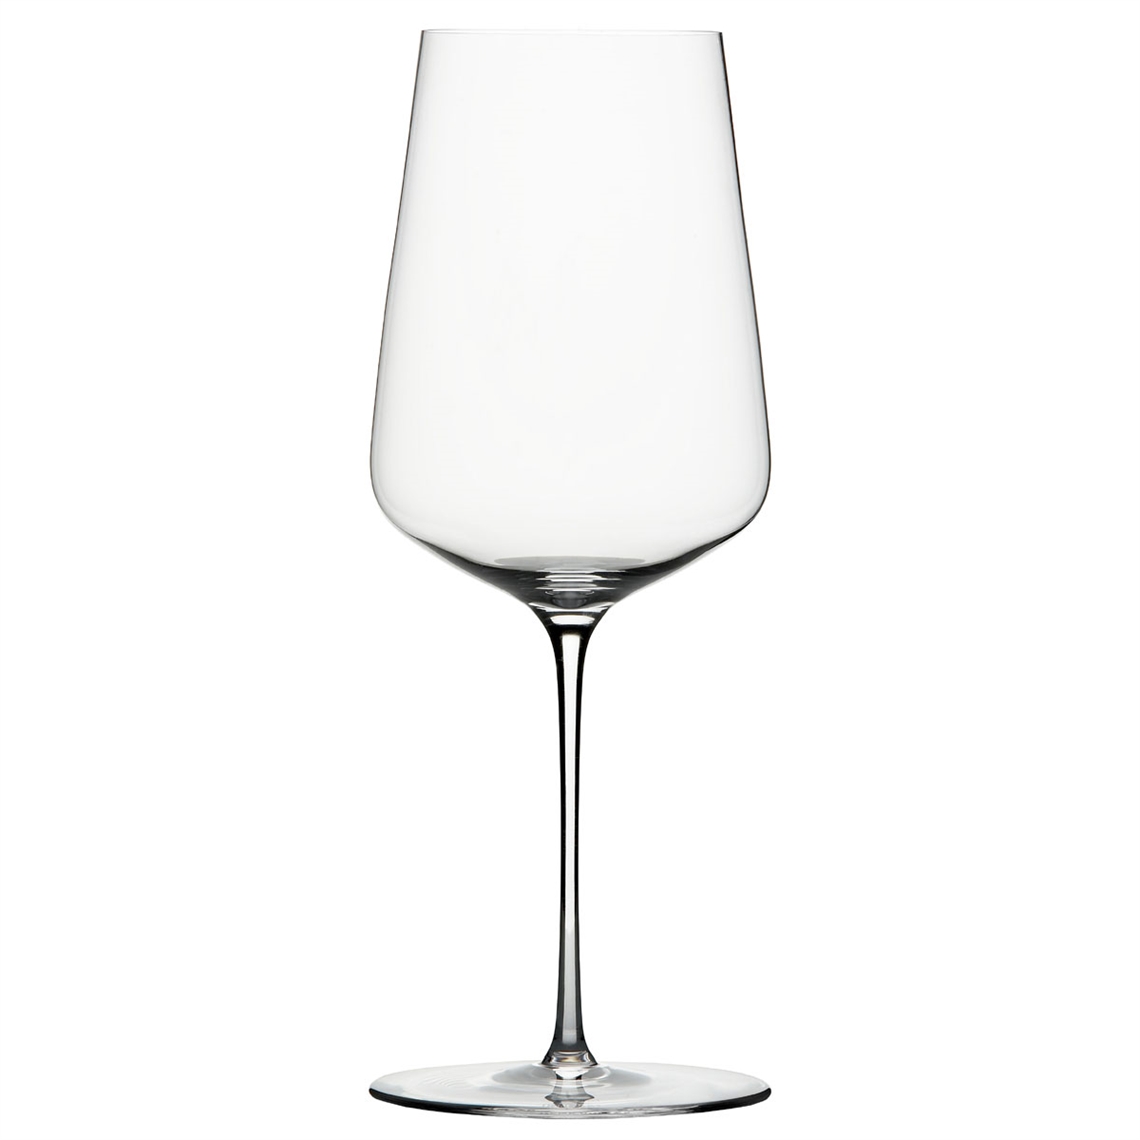 View more champagne glasses from our Crystal Wine Glasses range